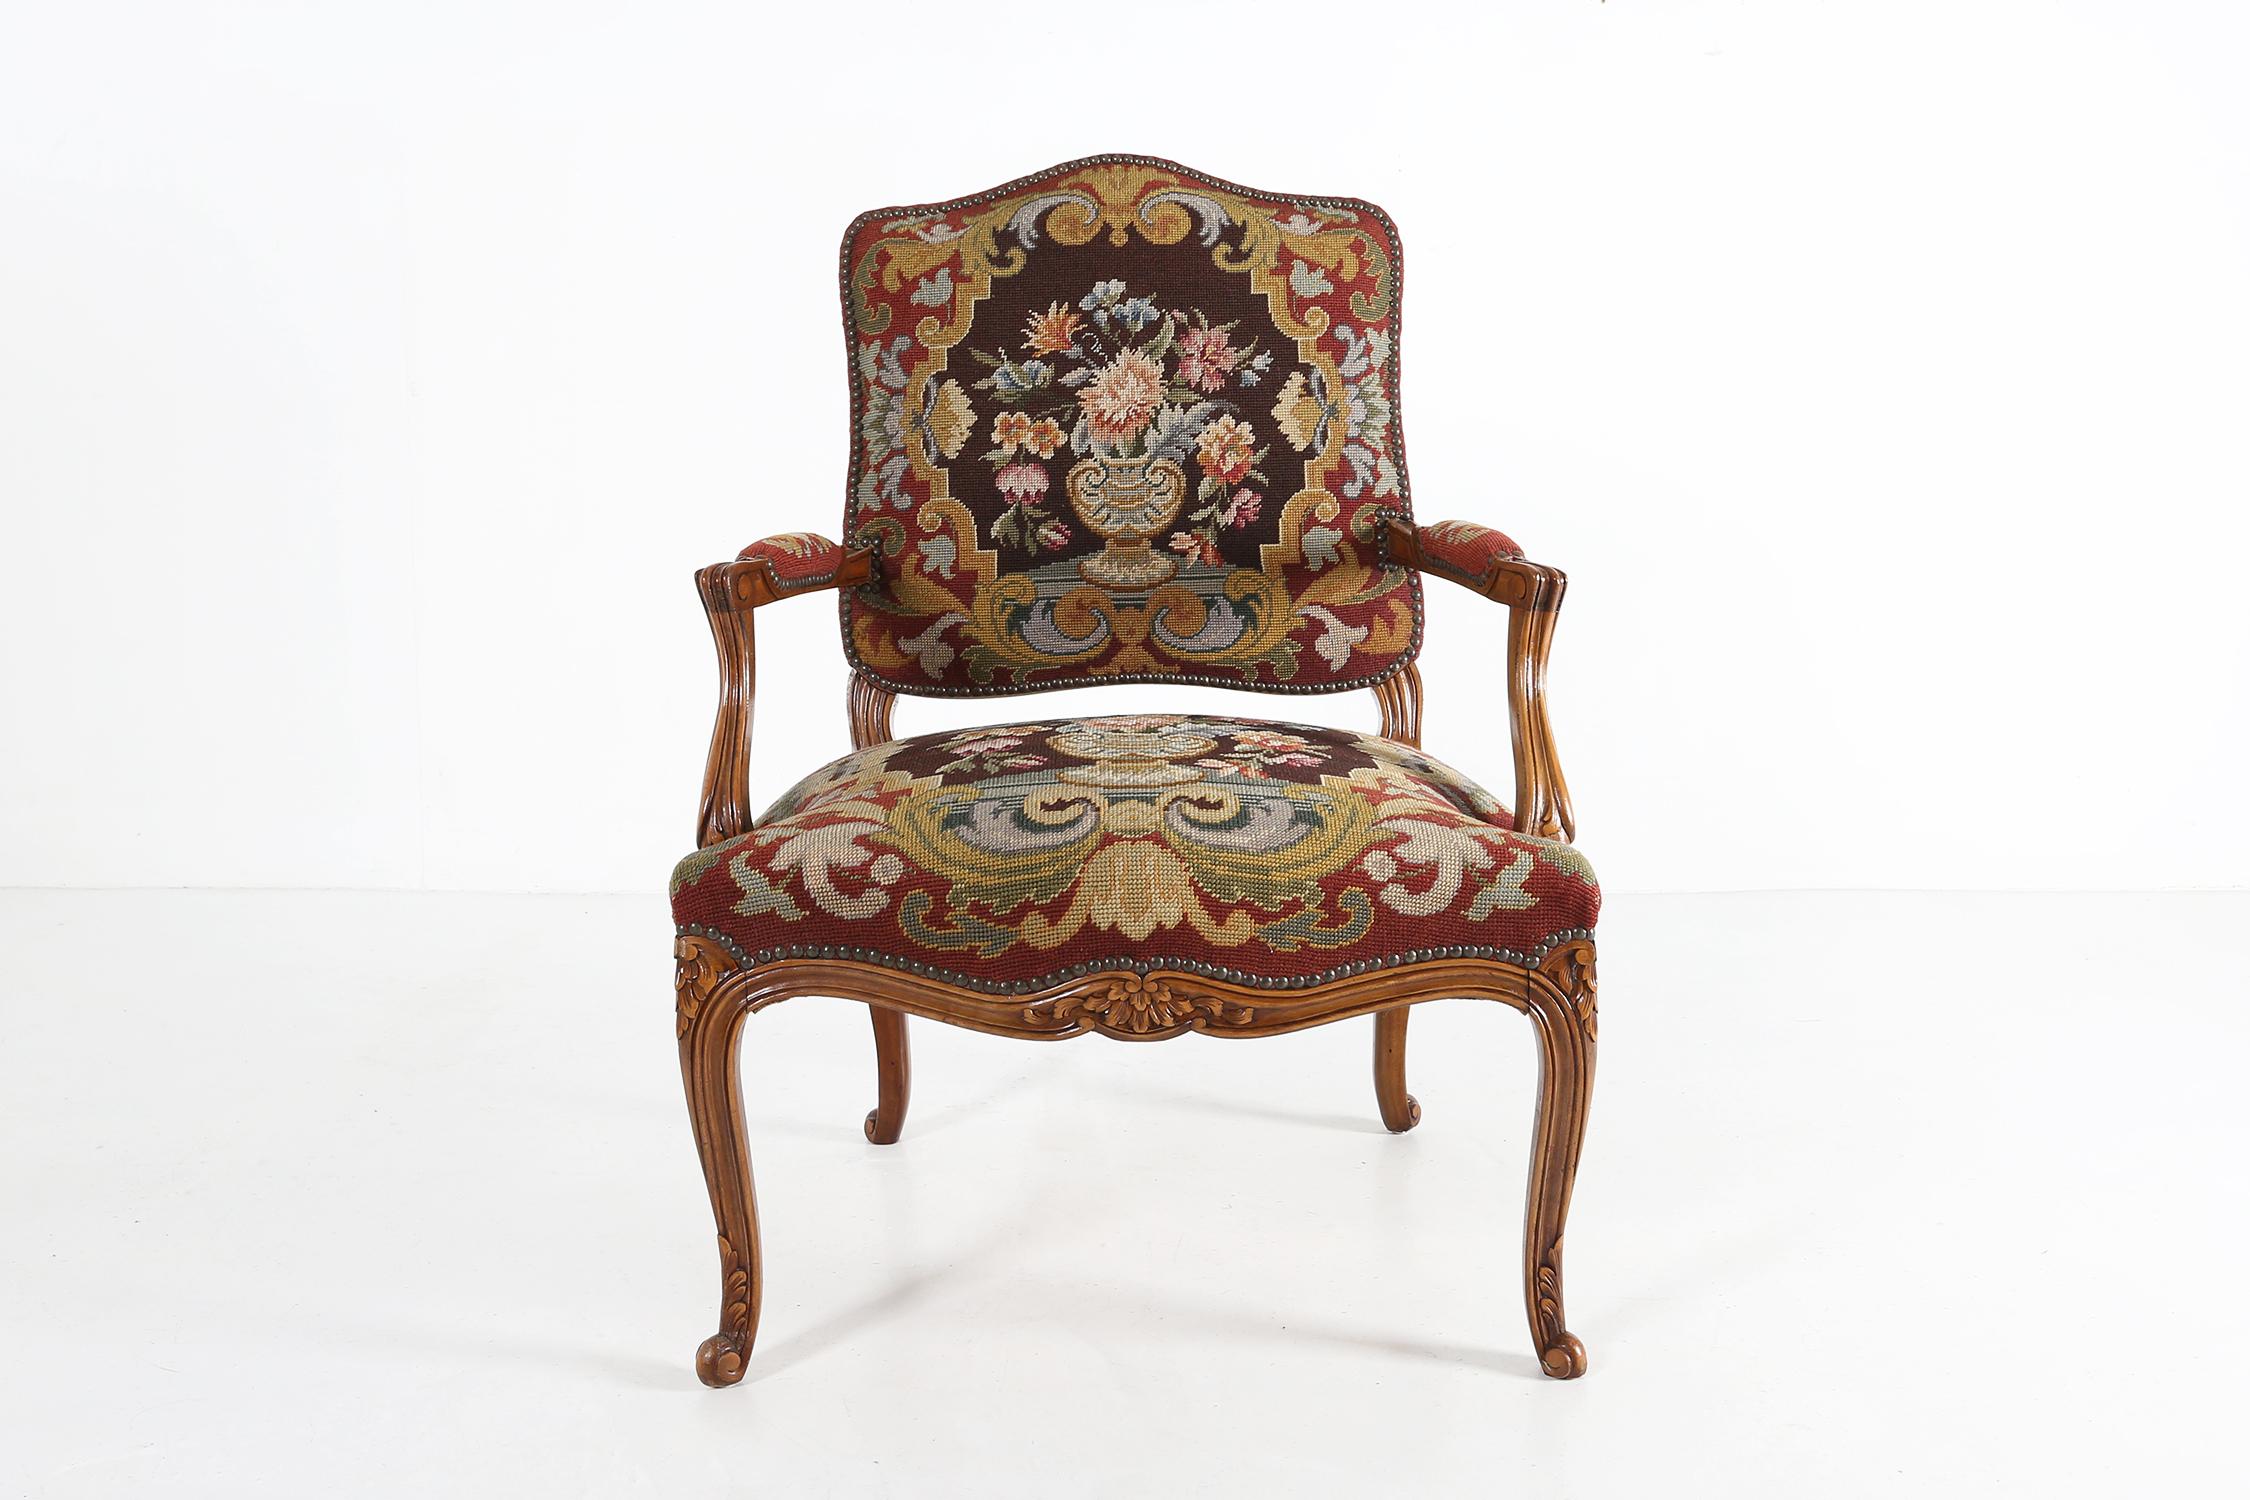 Louis XV armchair made in France.
made of a solid wooden base with some great sculpture details in the wood and a nice fabric with a flower pattern.